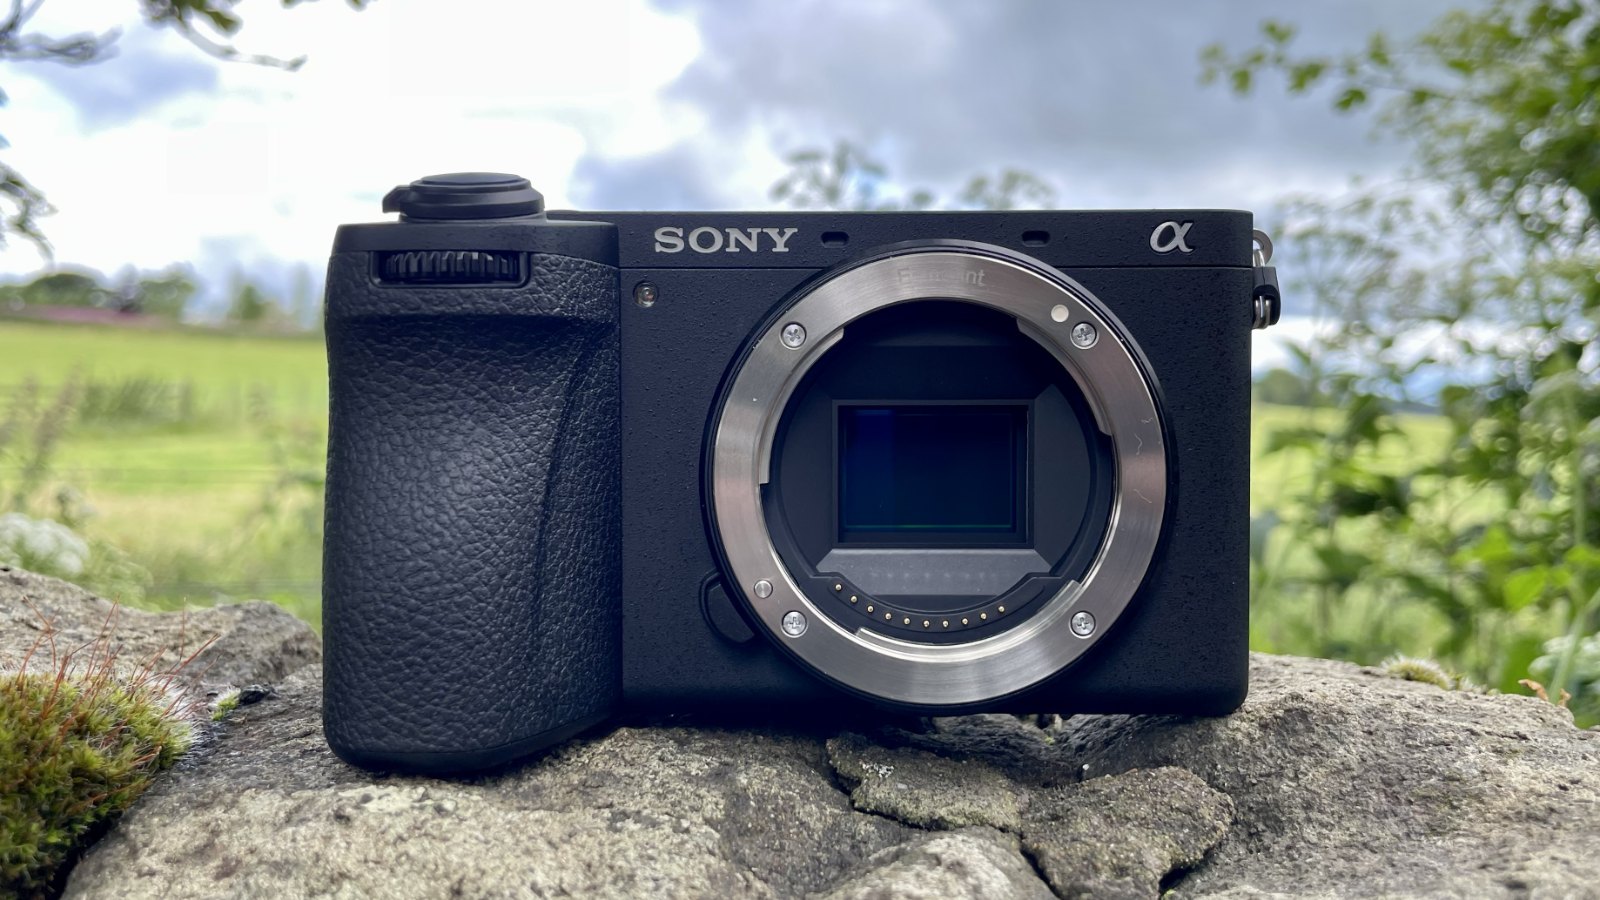 Sony Alpha A6700 mirrorless camera outside on a wall